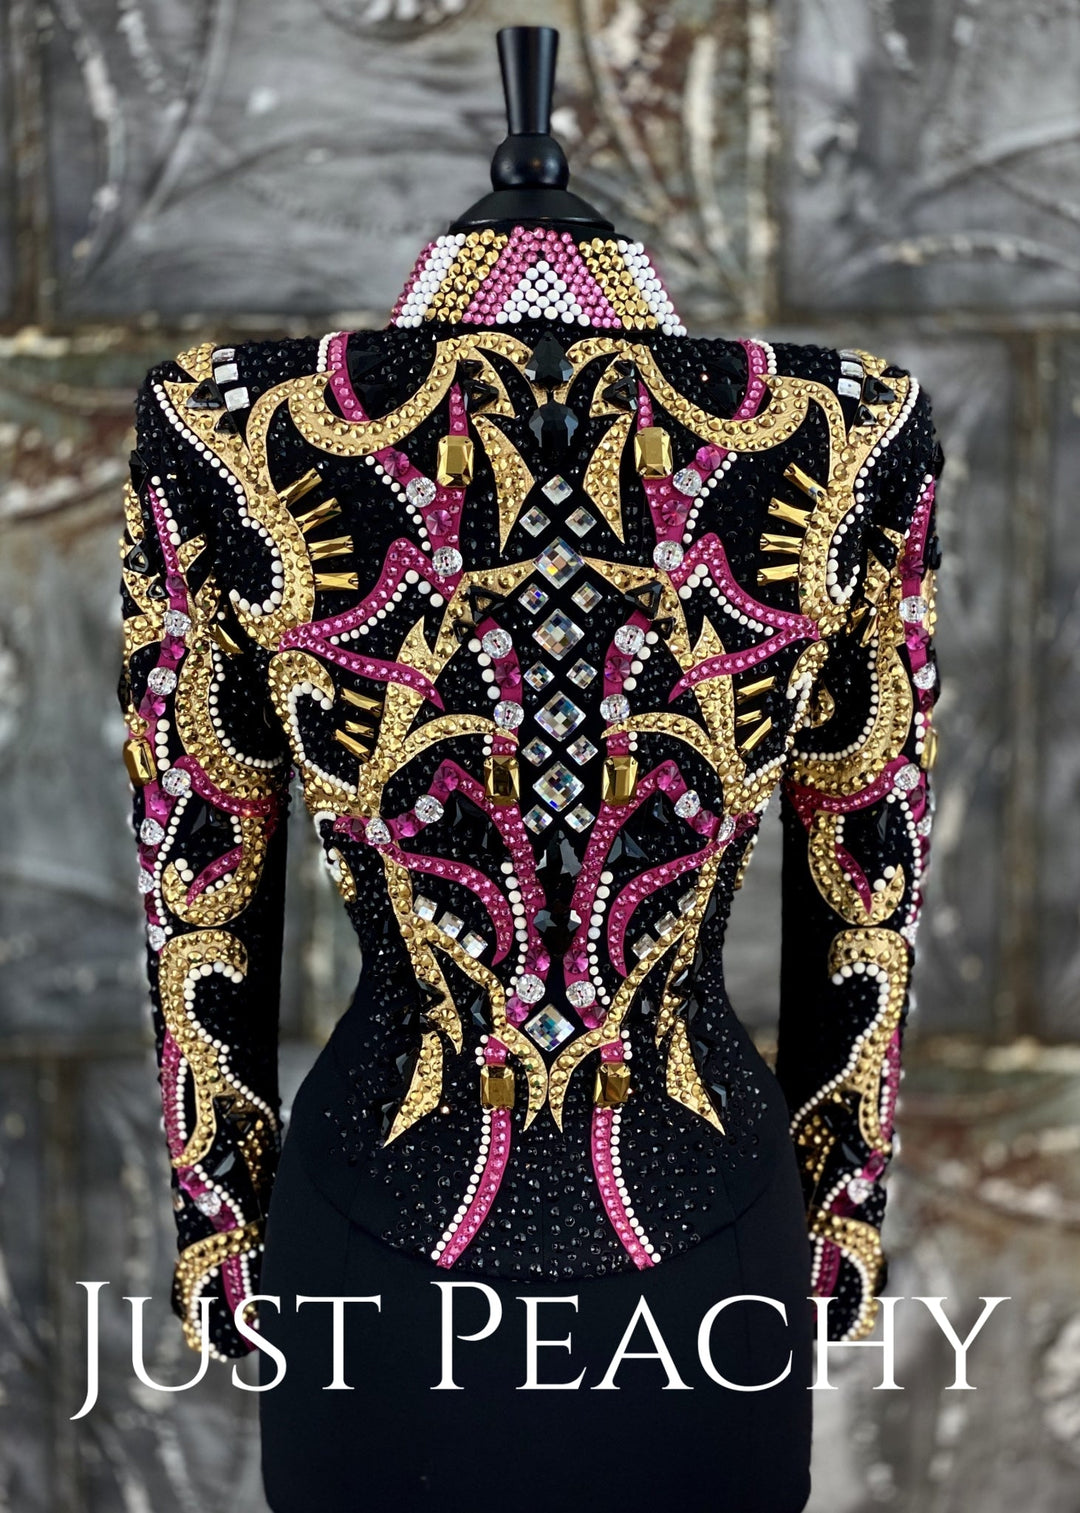 Fuchsia, Gold, White and Black Jacket By Lindsey James ~ Just Peachy Show Clothing